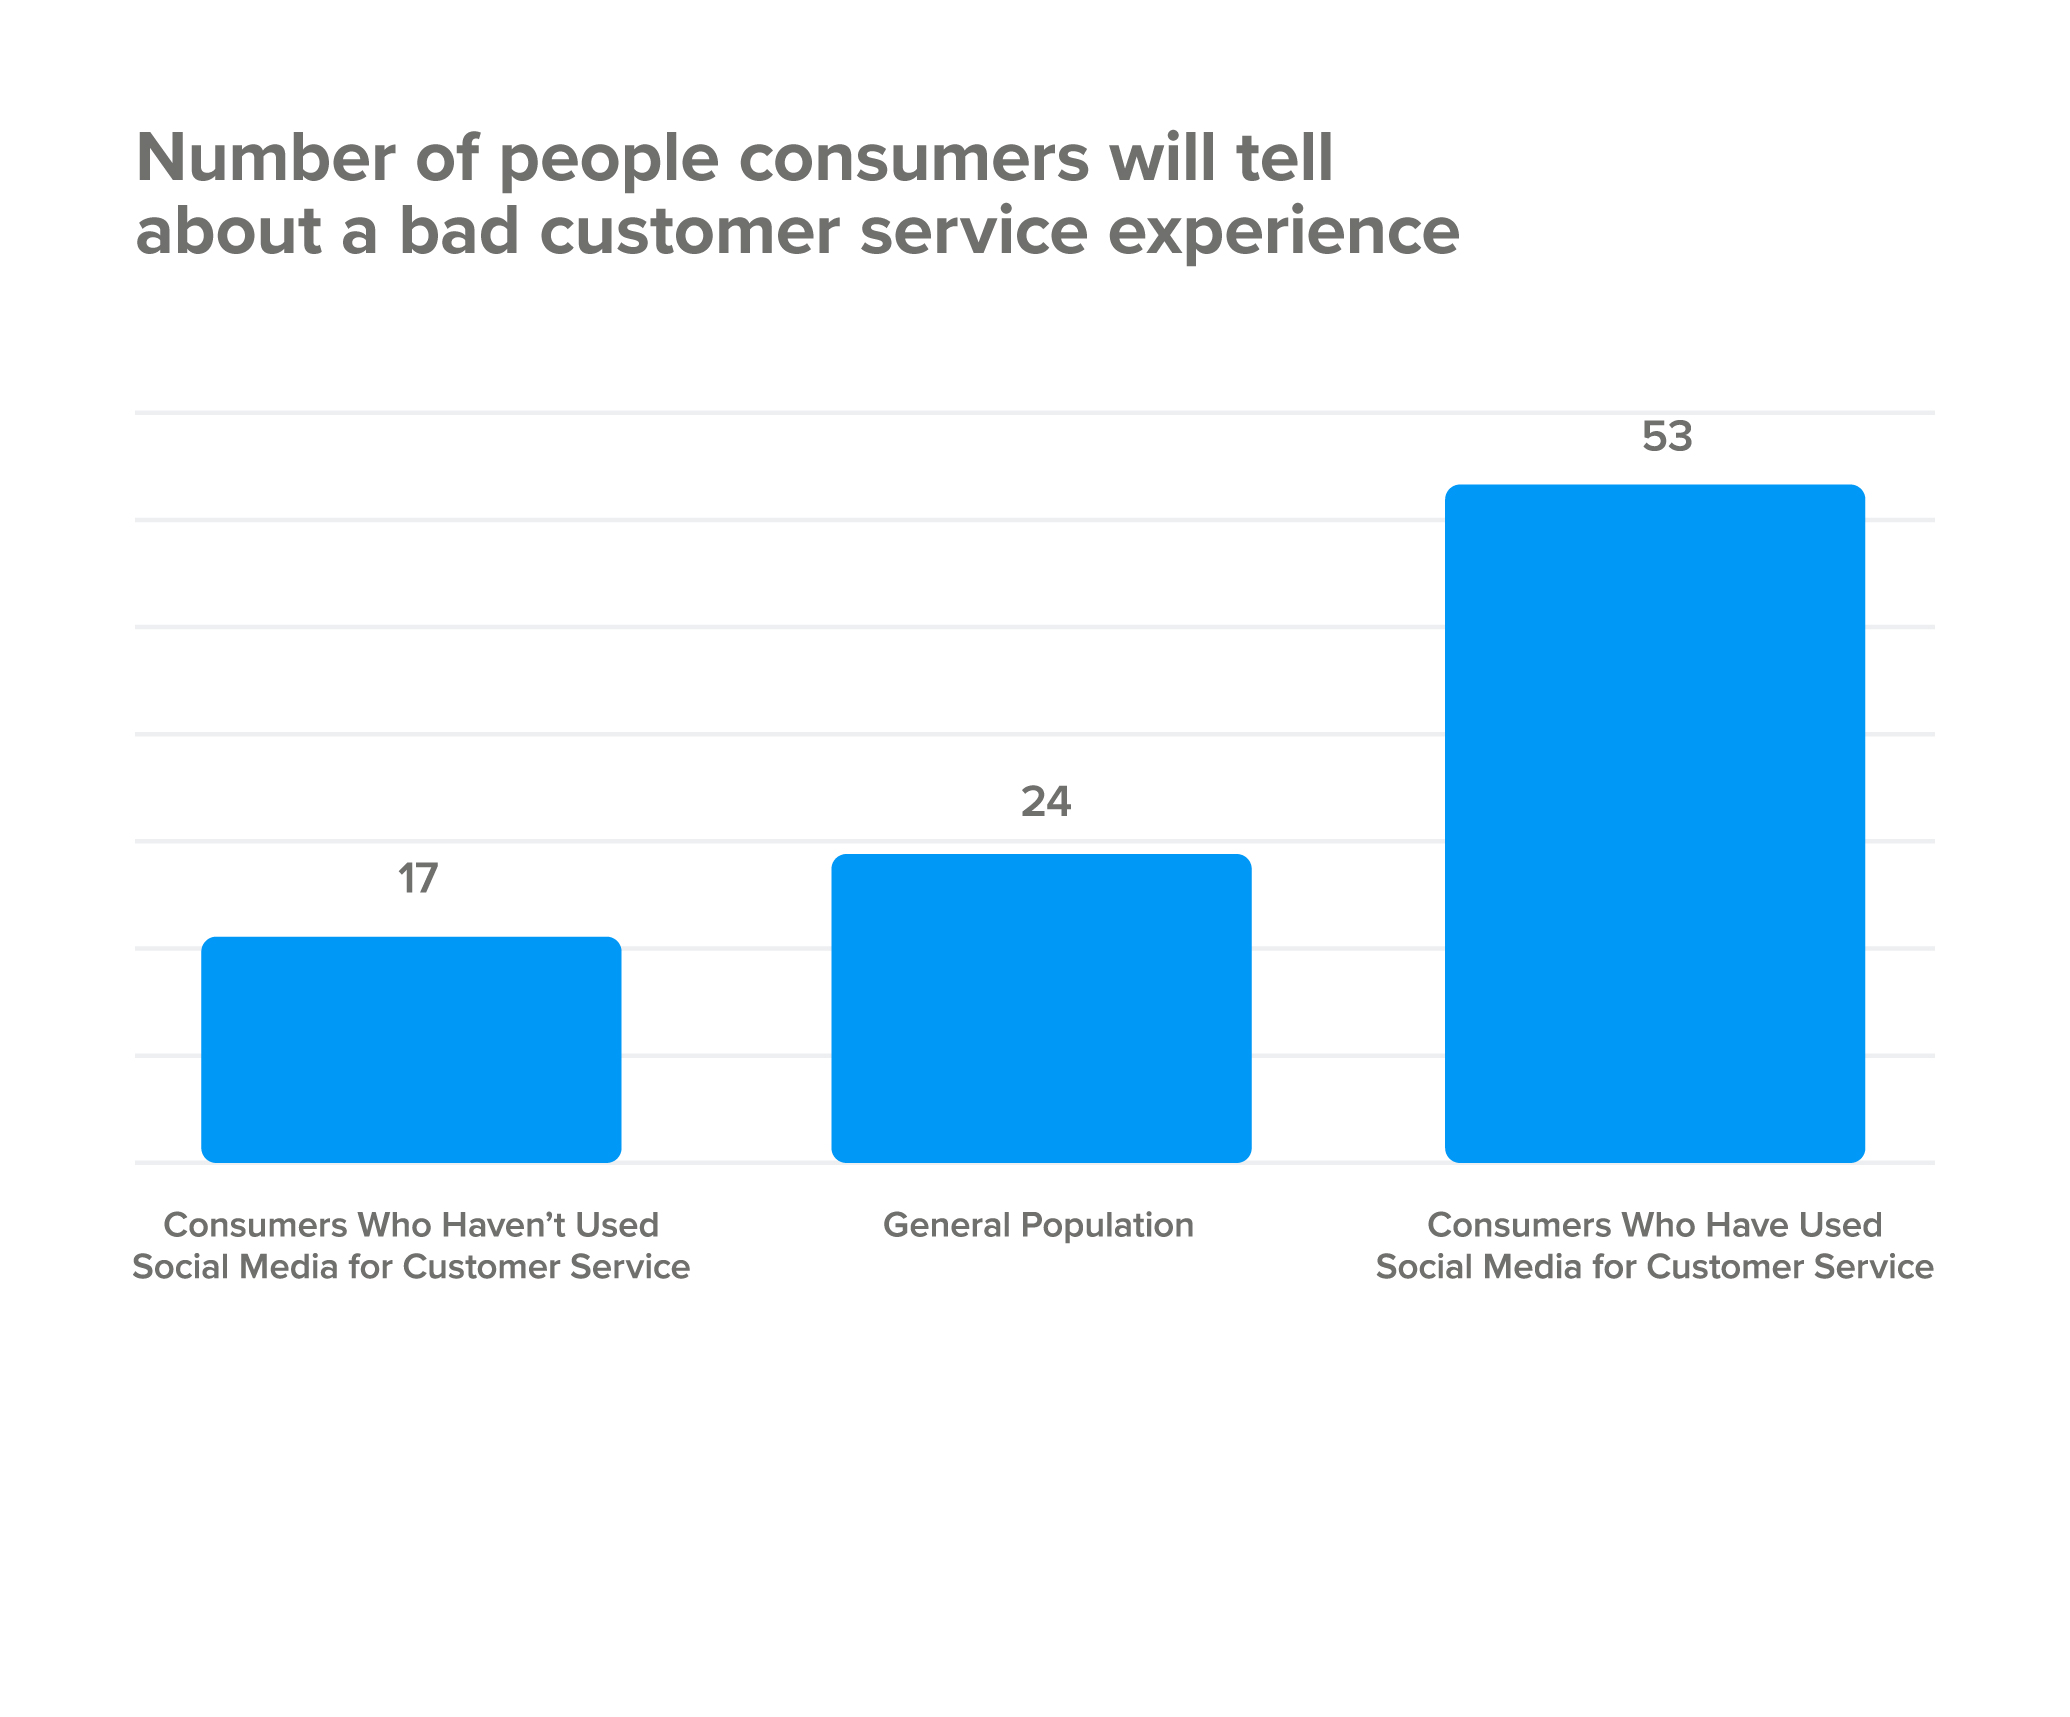 Number of people consumers will tell about a bad customer service experience